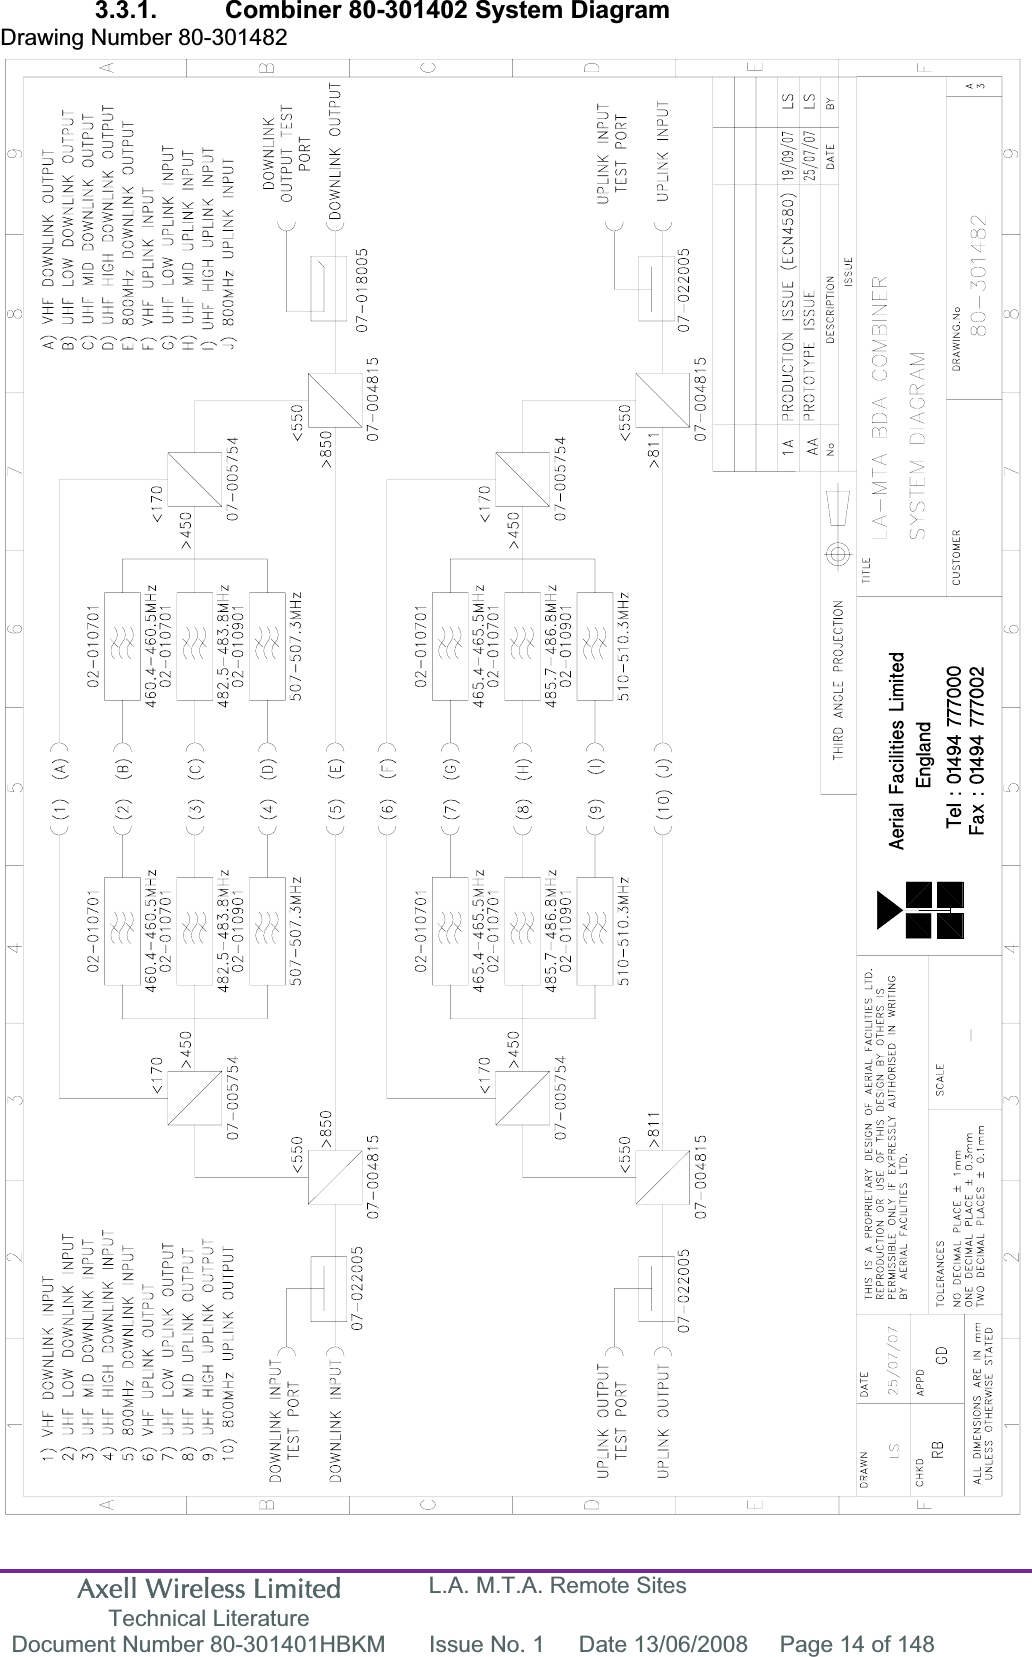 Axell Wireless Limited Technical Literature L.A. M.T.A. Remote Sites Document Number 80-301401HBKM  Issue No. 1  Date 13/06/2008  Page 14 of 148 3.3.1.  Combiner 80-301402 System Diagram Drawing Number 80-301482 